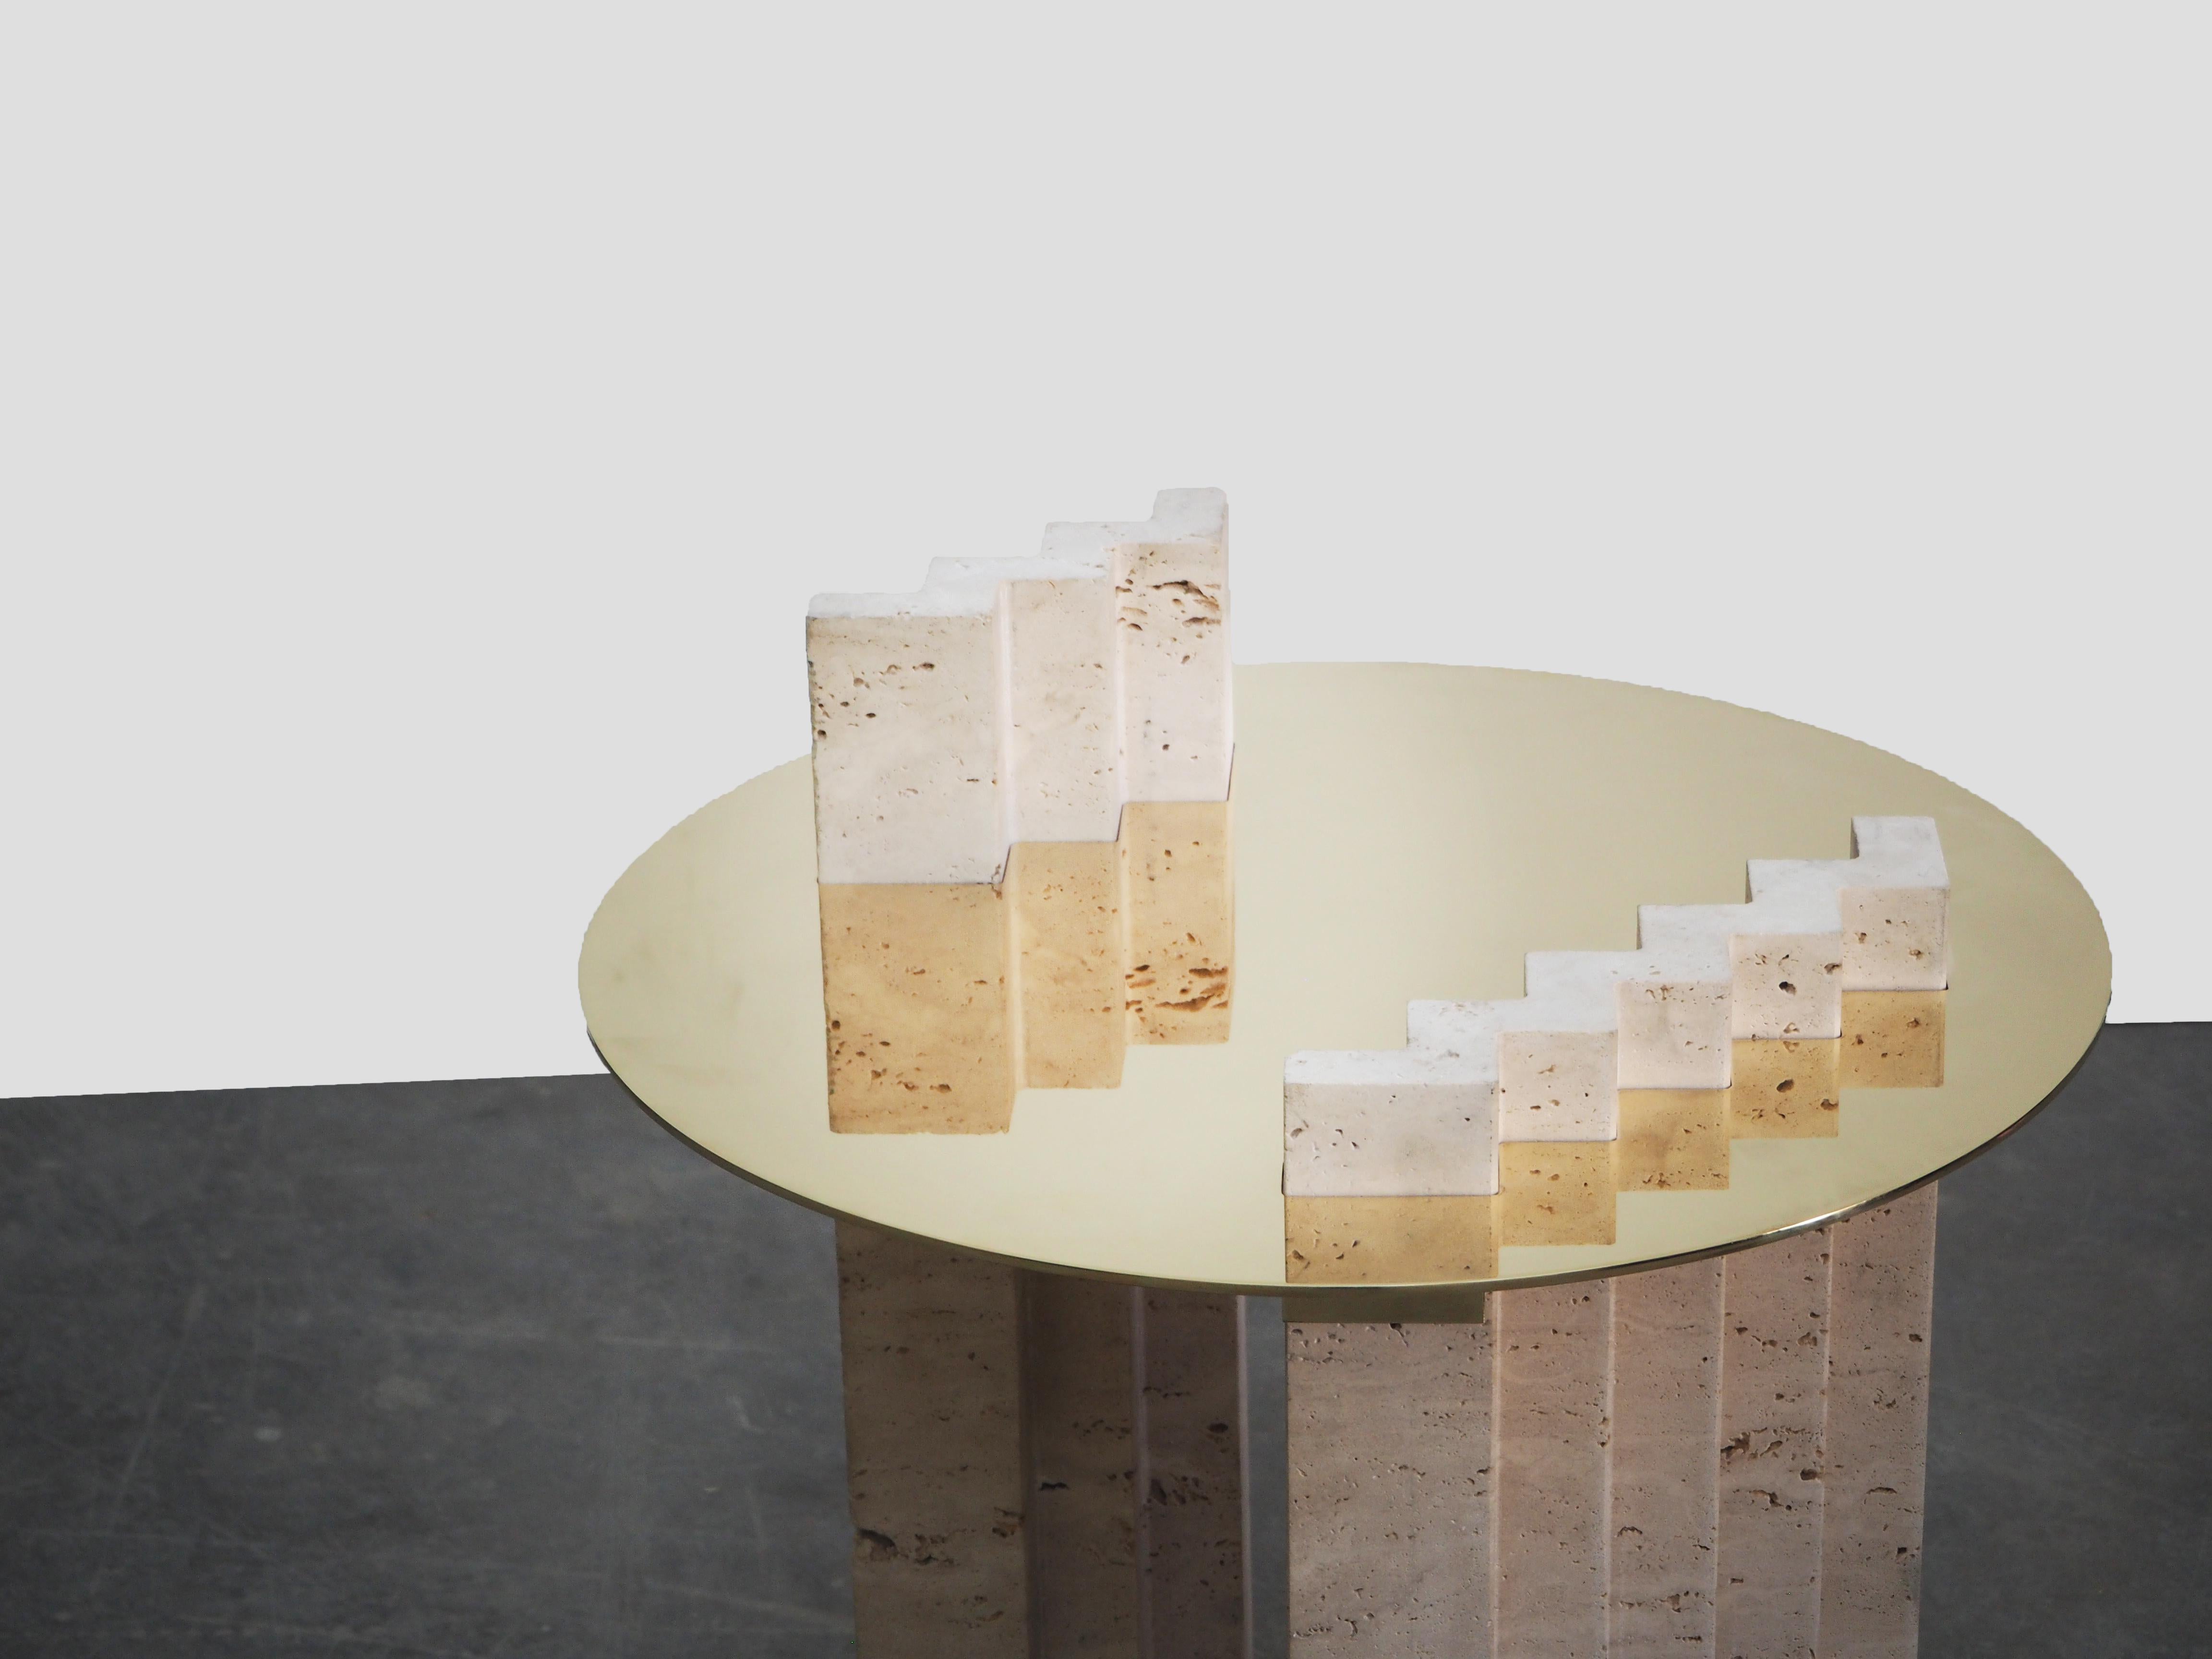 English Side Table Travertine and Brass Sculpted by Dessislava Madanska